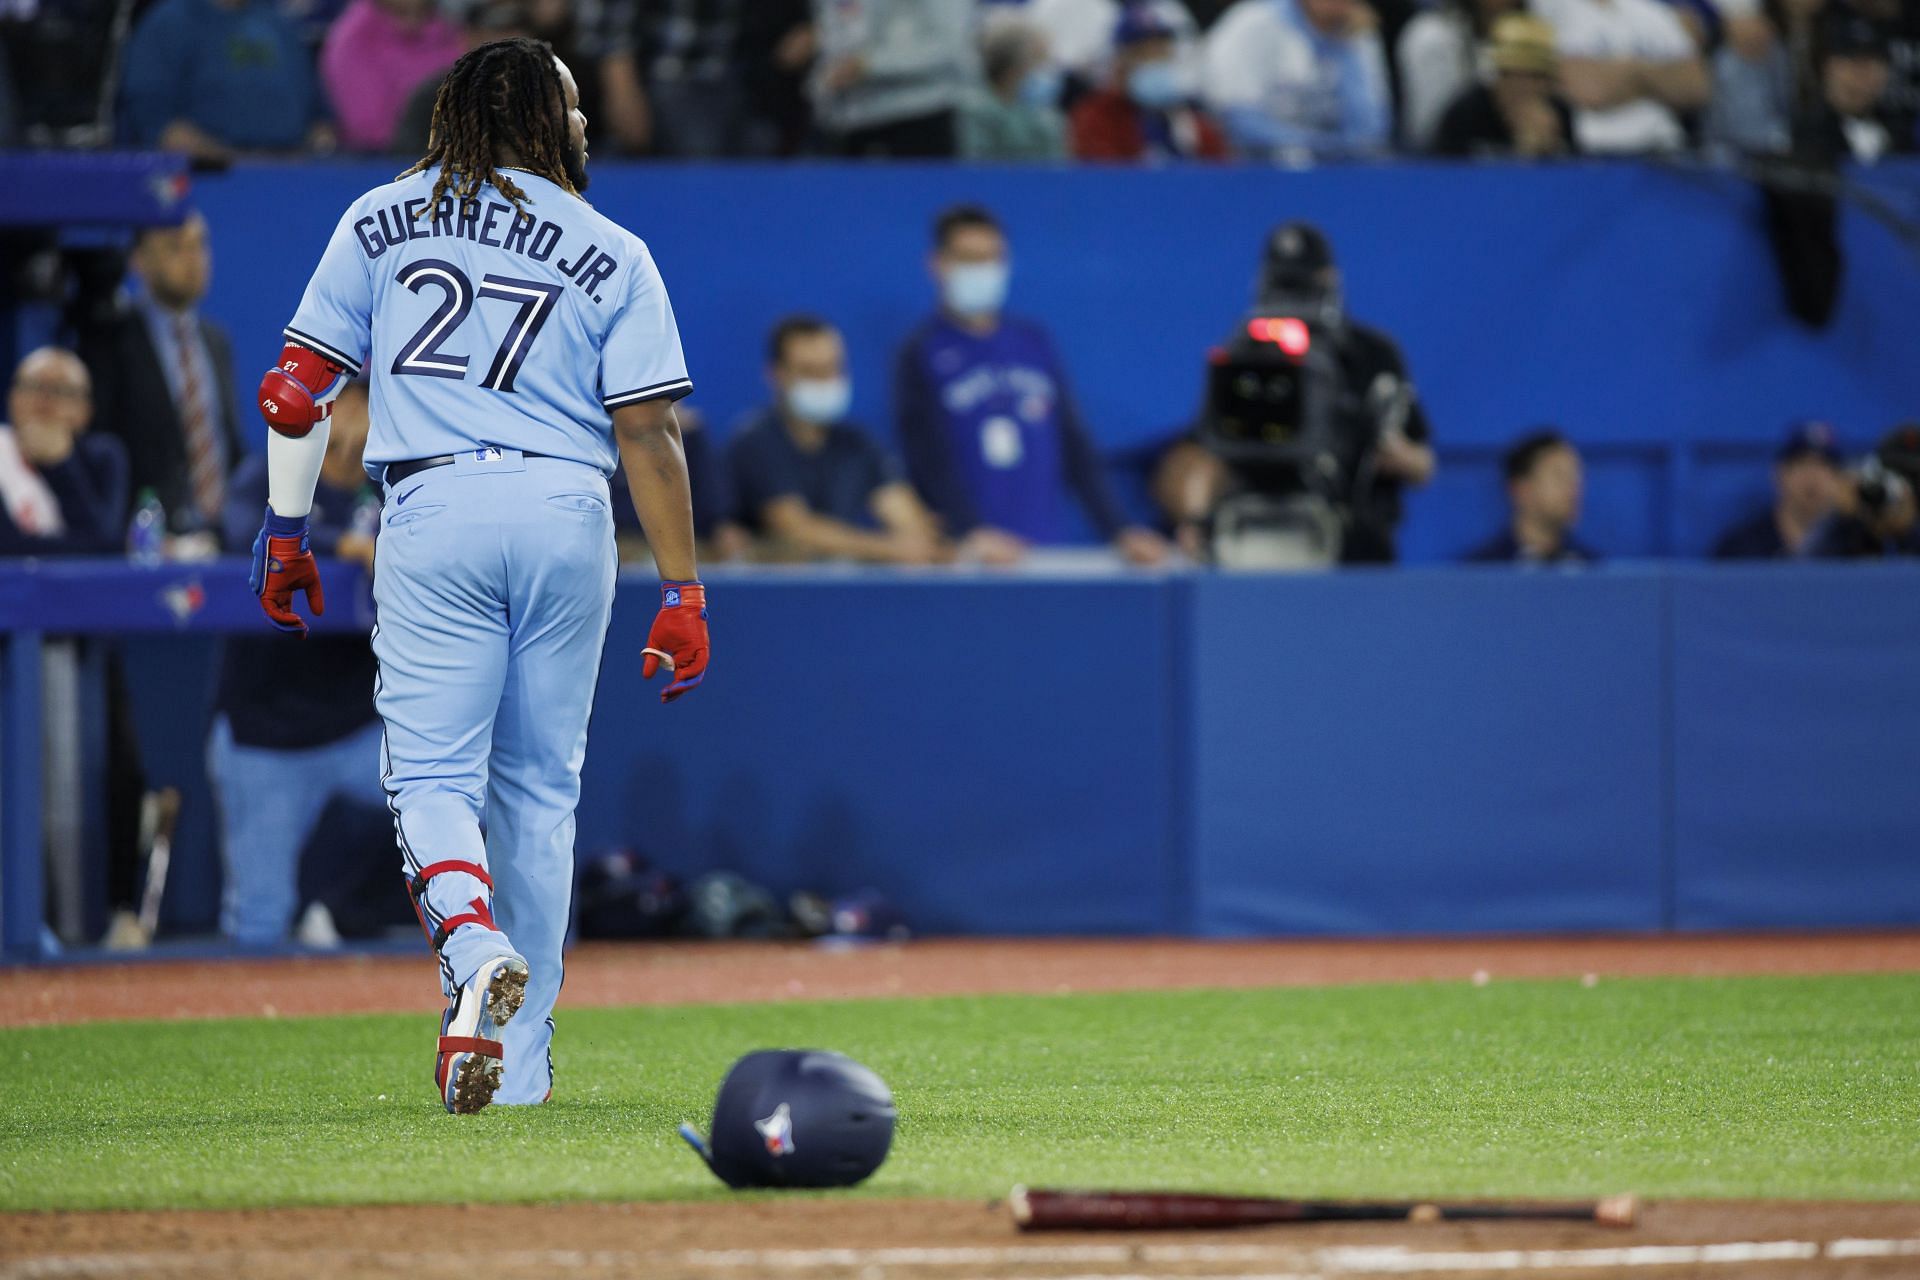 Watch: Vladimir Guerrero Jr. opted to sit in the Toronto Blue Jays bullpen instead of the dugout after grounding into an out